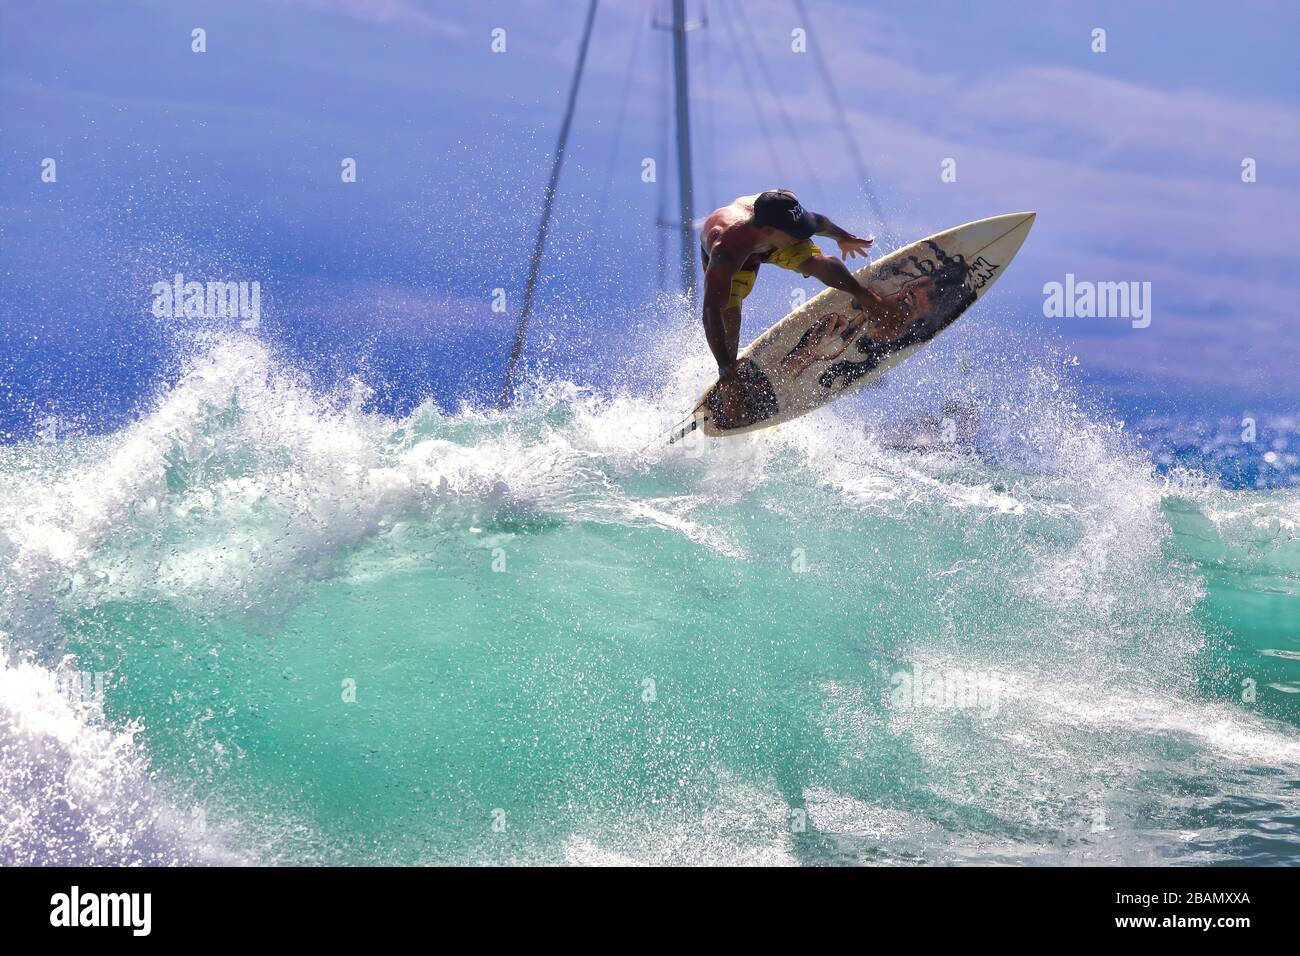 High energym action of a young male surfer riding a turbulent wave. Stock Photo